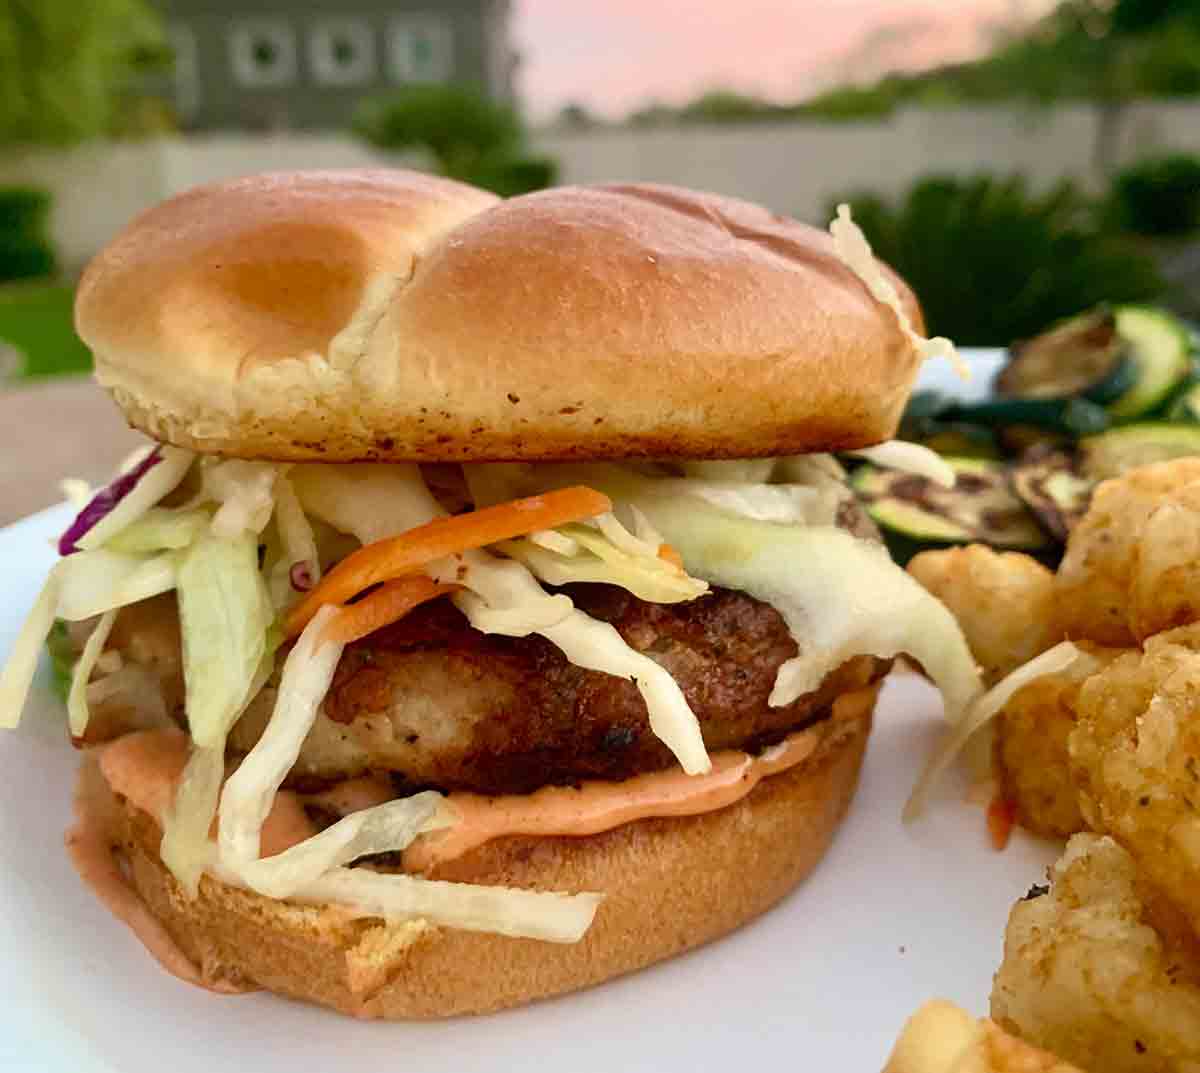 A grilled pork burger topped with coleslaw and tater tots on the side.